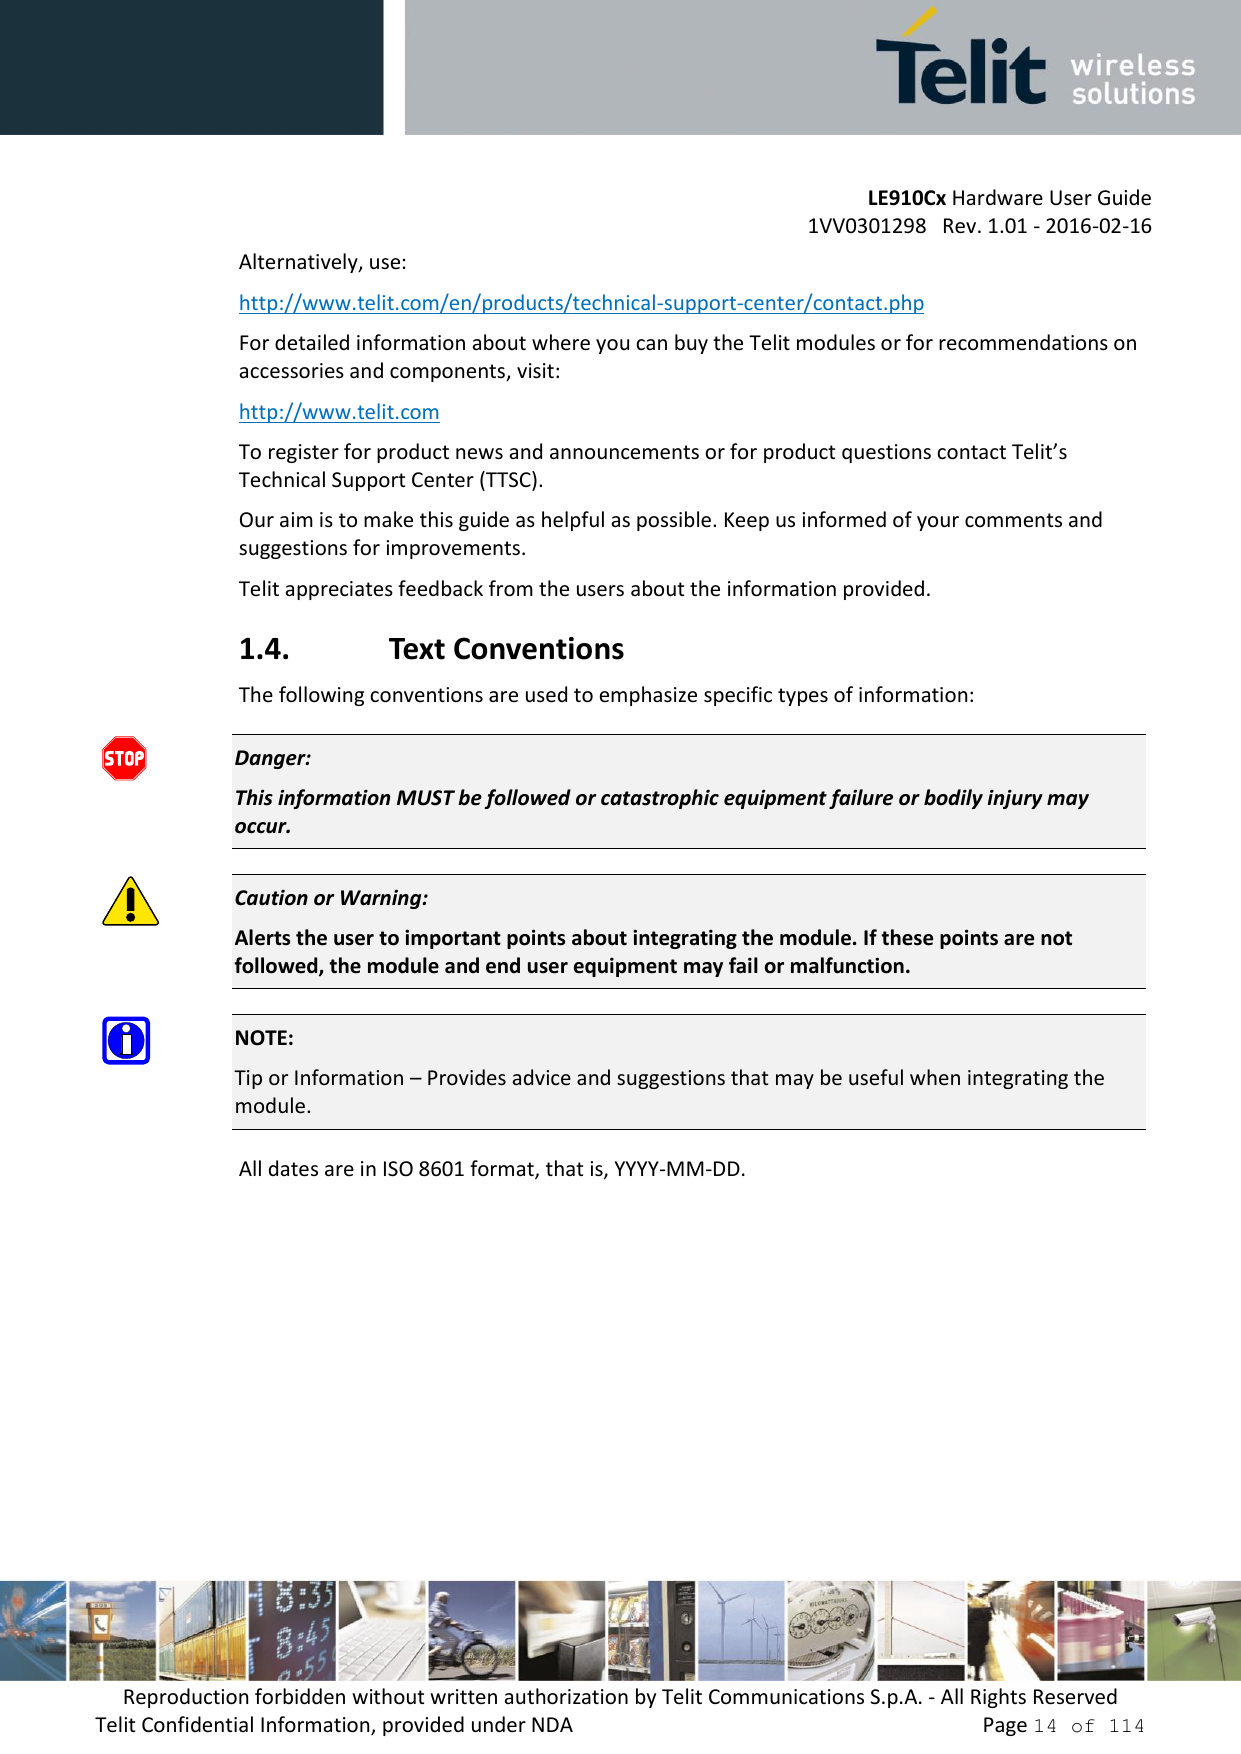         LE910Cx Hardware User Guide     1VV0301298   Rev. 1.01 - 2016-02-16 Reproduction forbidden without written authorization by Telit Communications S.p.A. - All Rights Reserved Telit Confidential Information, provided under NDA                 Page 14 of 114 Alternatively, use:  http://www.telit.com/en/products/technical-support-center/contact.php For detailed information about where you can buy the Telit modules or for recommendations on accessories and components, visit:  http://www.telit.com To register for product news and announcements or for product questions contact Telit’s Technical Support Center (TTSC). Our aim is to make this guide as helpful as possible. Keep us informed of your comments and suggestions for improvements. Telit appreciates feedback from the users about the information provided. 1.4. Text Conventions The following conventions are used to emphasize specific types of information:  Danger: This information MUST be followed or catastrophic equipment failure or bodily injury may occur.  Caution or Warning: Alerts the user to important points about integrating the module. If these points are not followed, the module and end user equipment may fail or malfunction.  NOTE: Tip or Information – Provides advice and suggestions that may be useful when integrating the module. All dates are in ISO 8601 format, that is, YYYY-MM-DD.   